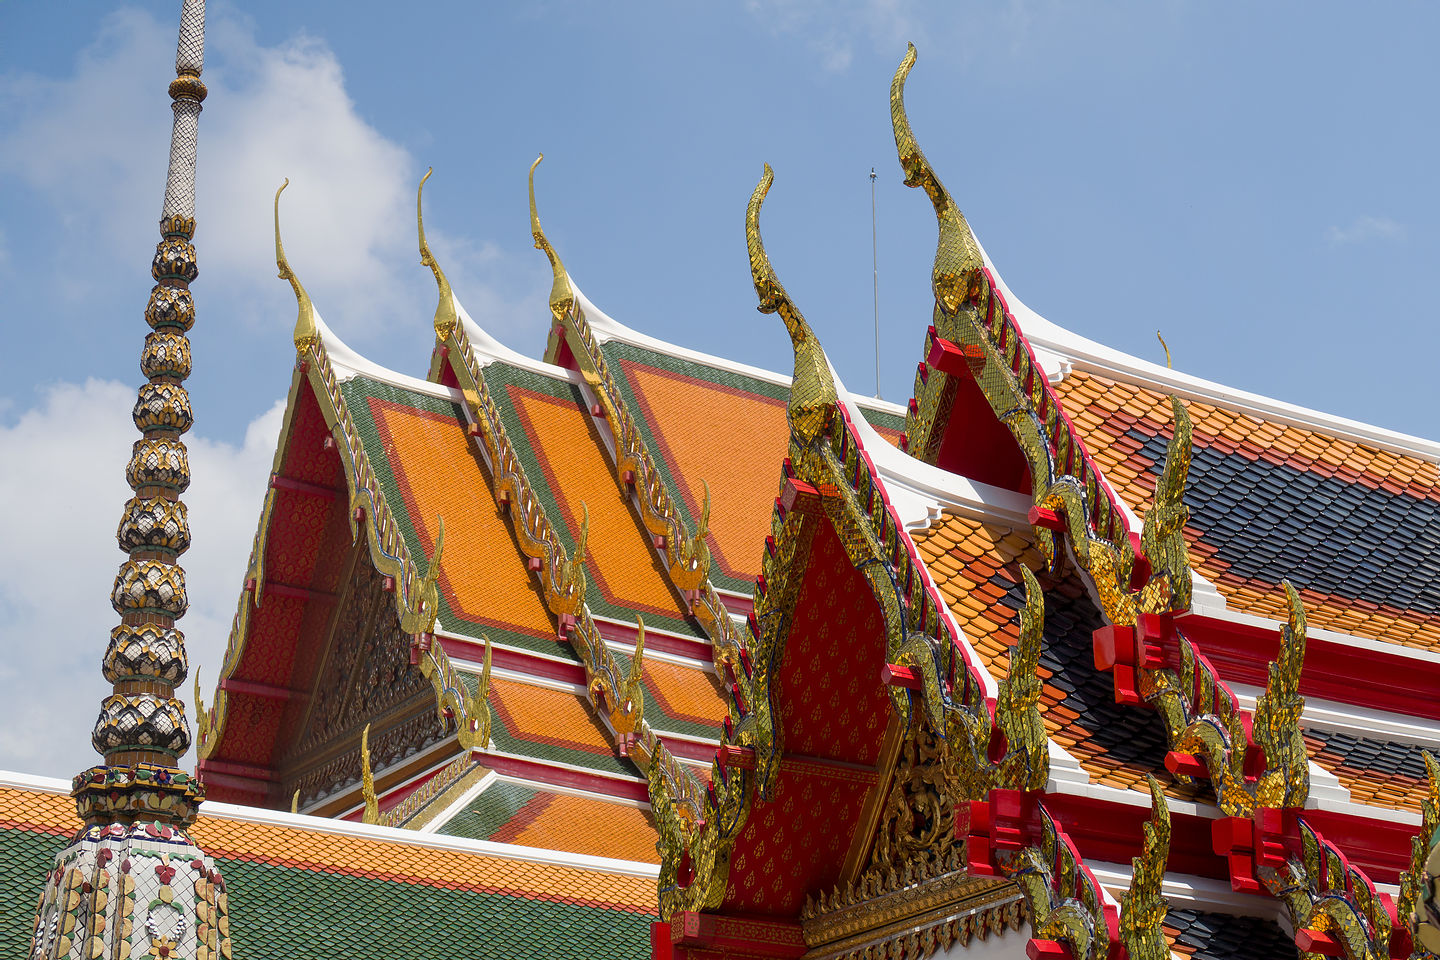 Wat Pho chedi rooftop with traditional blade-like projections